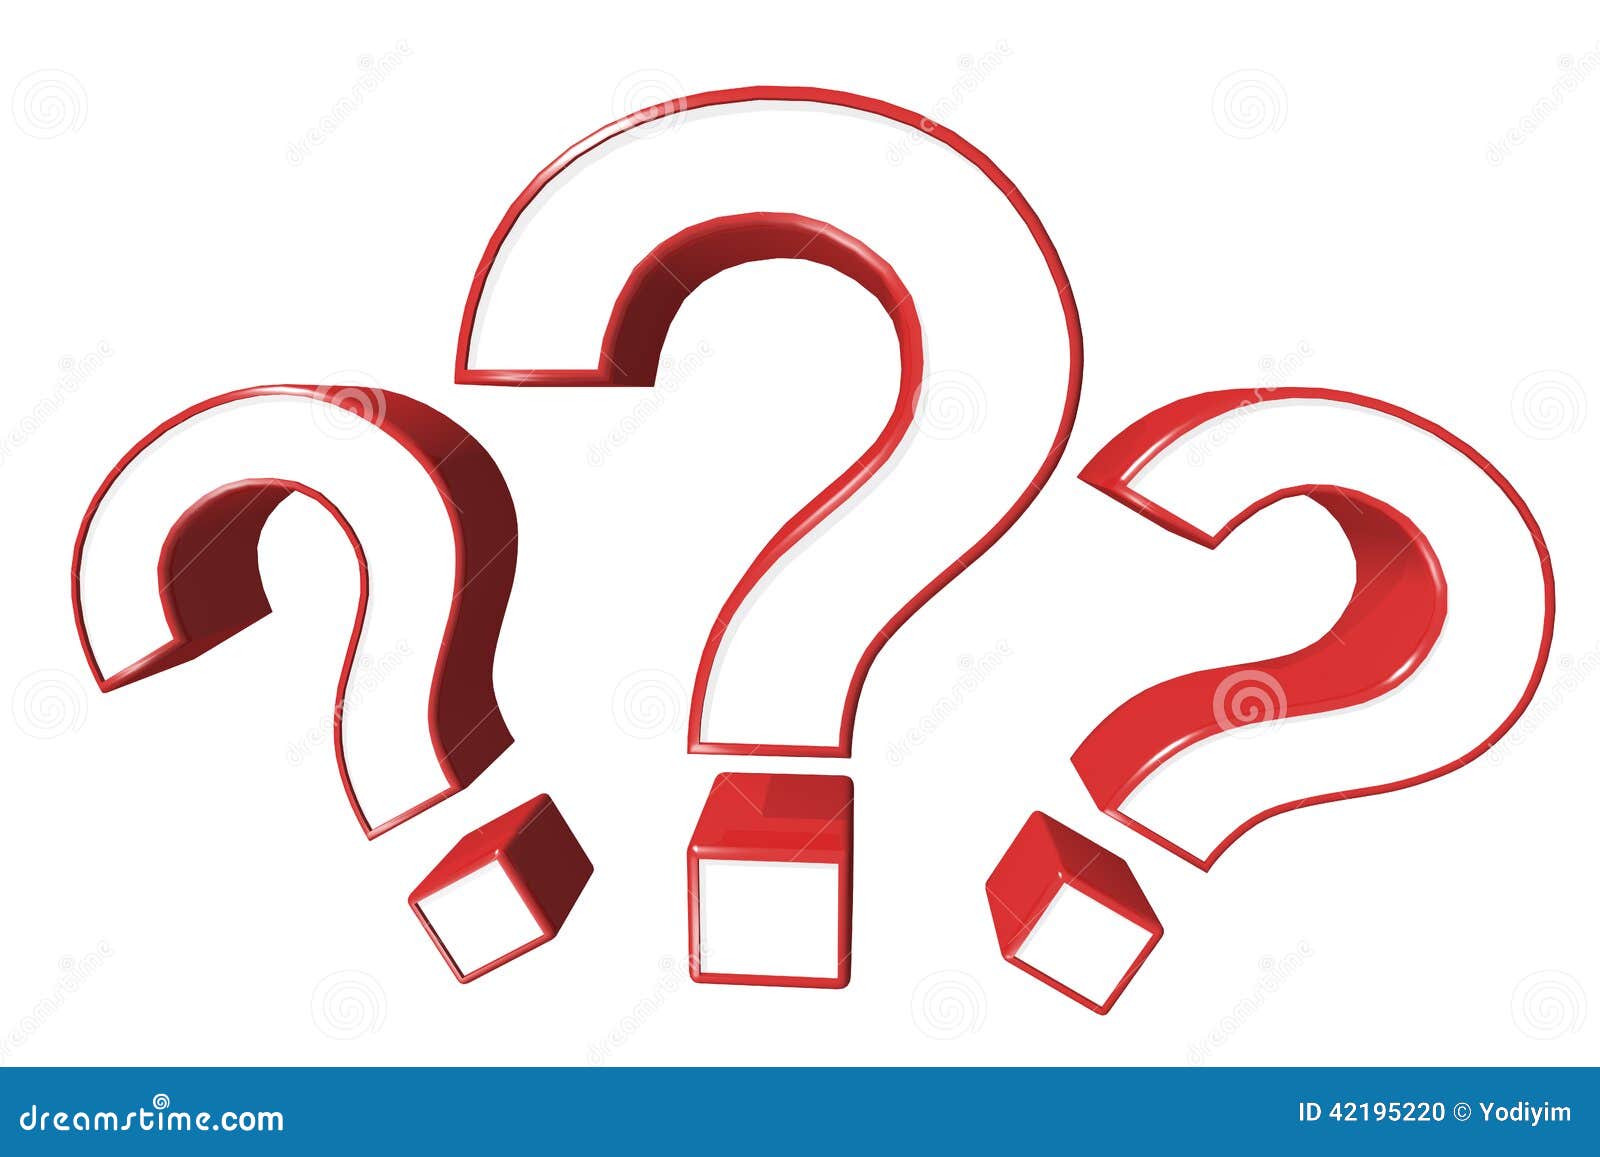 Three of Red Question Marks Stock Illustration - Illustration of icon ...